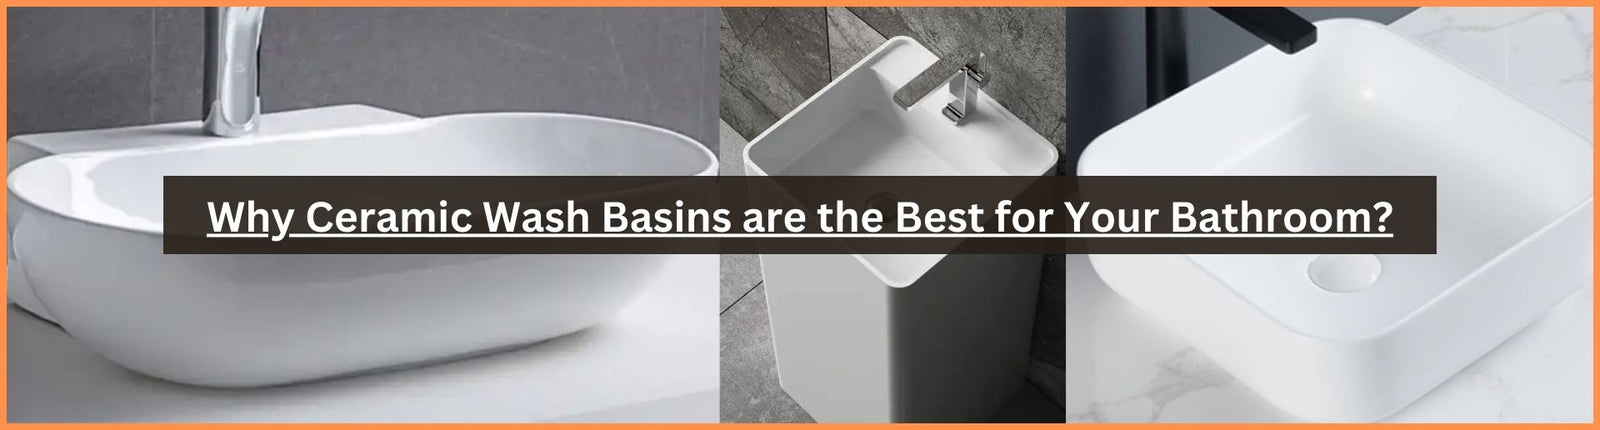 Why Ceramic Wash Basins are the Best for Your Bathroom